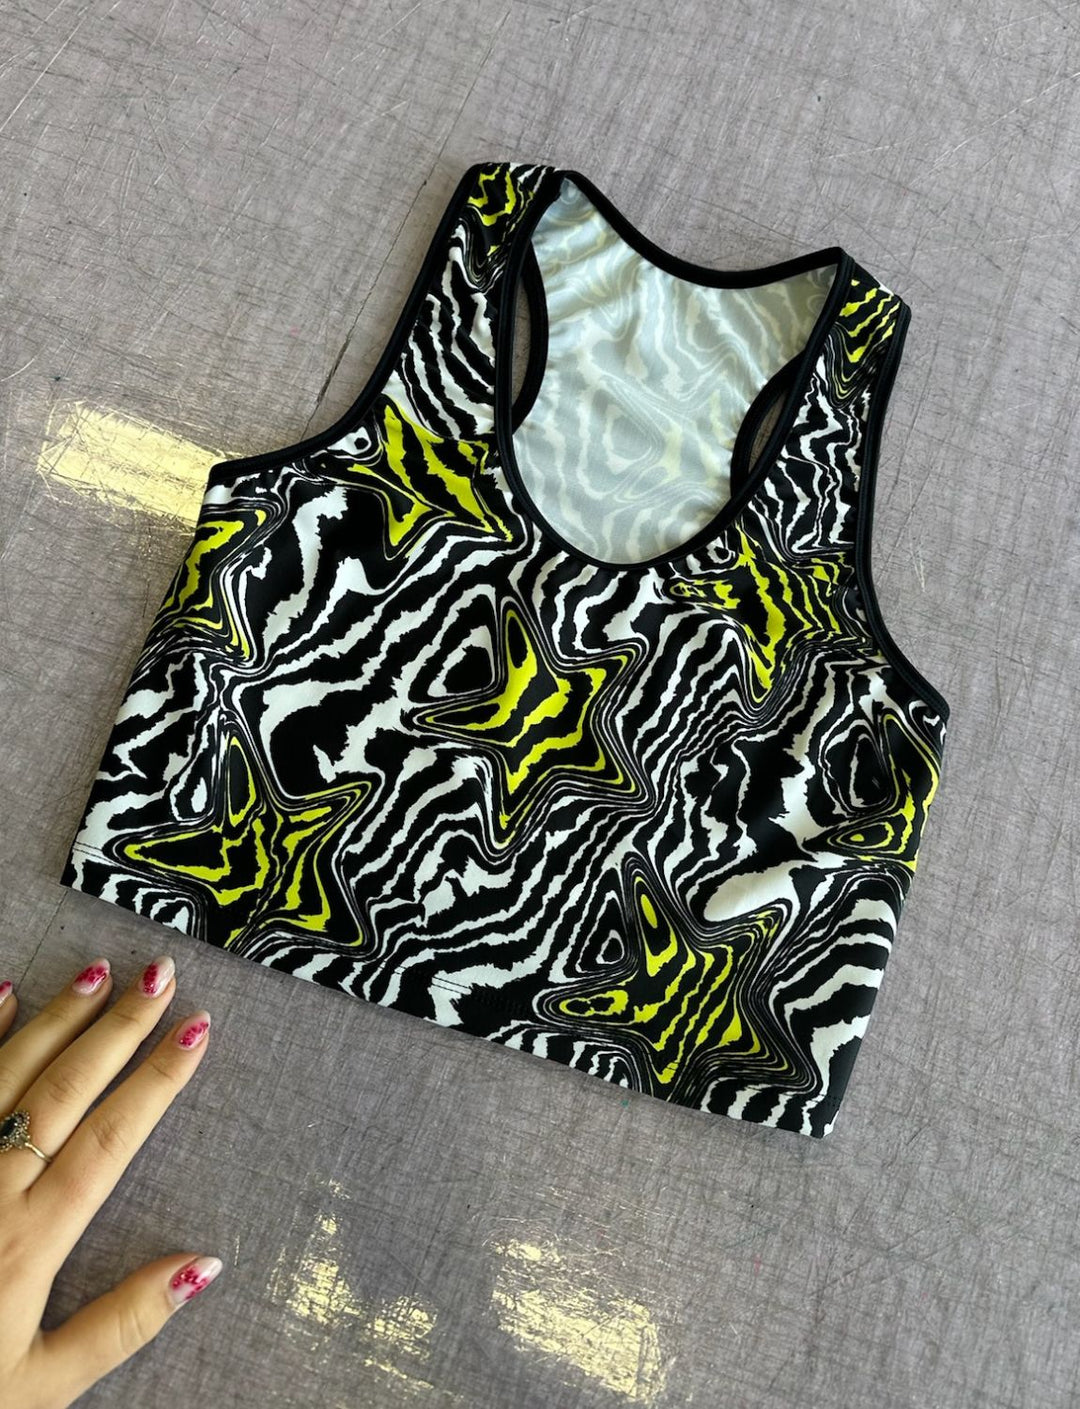 Lycra racerback crop top in black and white swirly print with yellow stars.